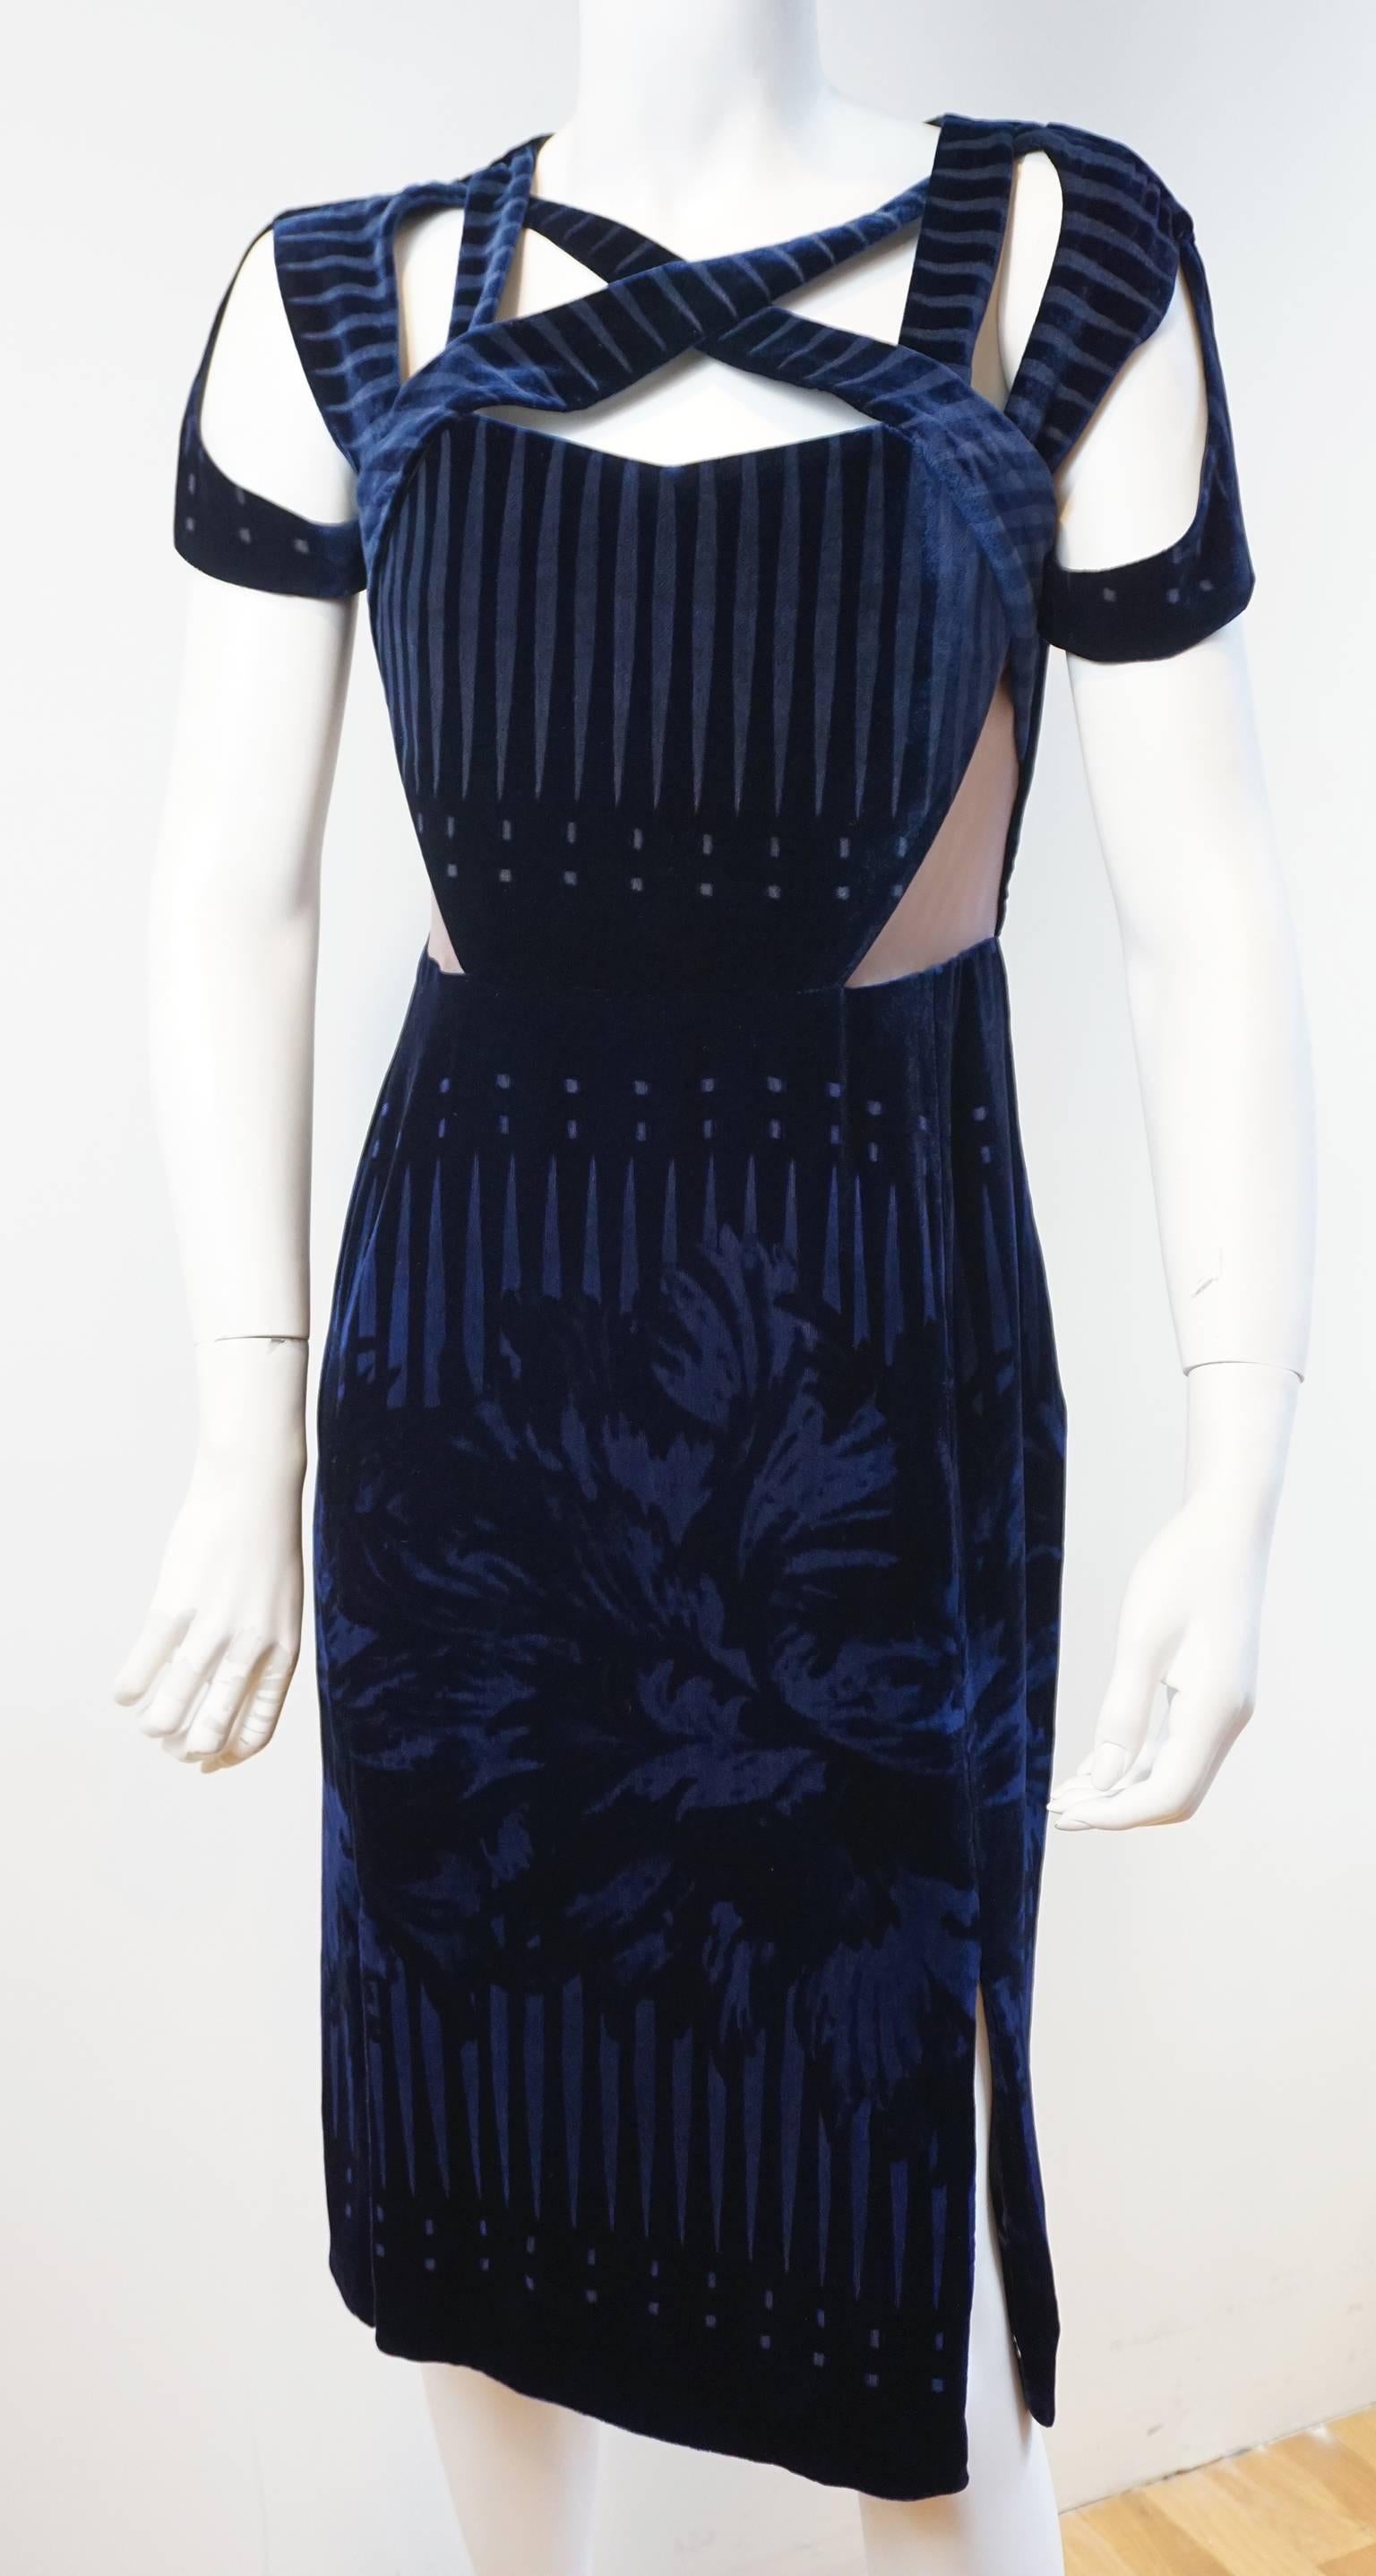 The rich navy velvet is decorates with a tonal floral and gprahic print that further accentuates the silhouette. There is an internal zipper corset. This secures the bodice and allows the straps to rest across the top of the chest. There are lined,